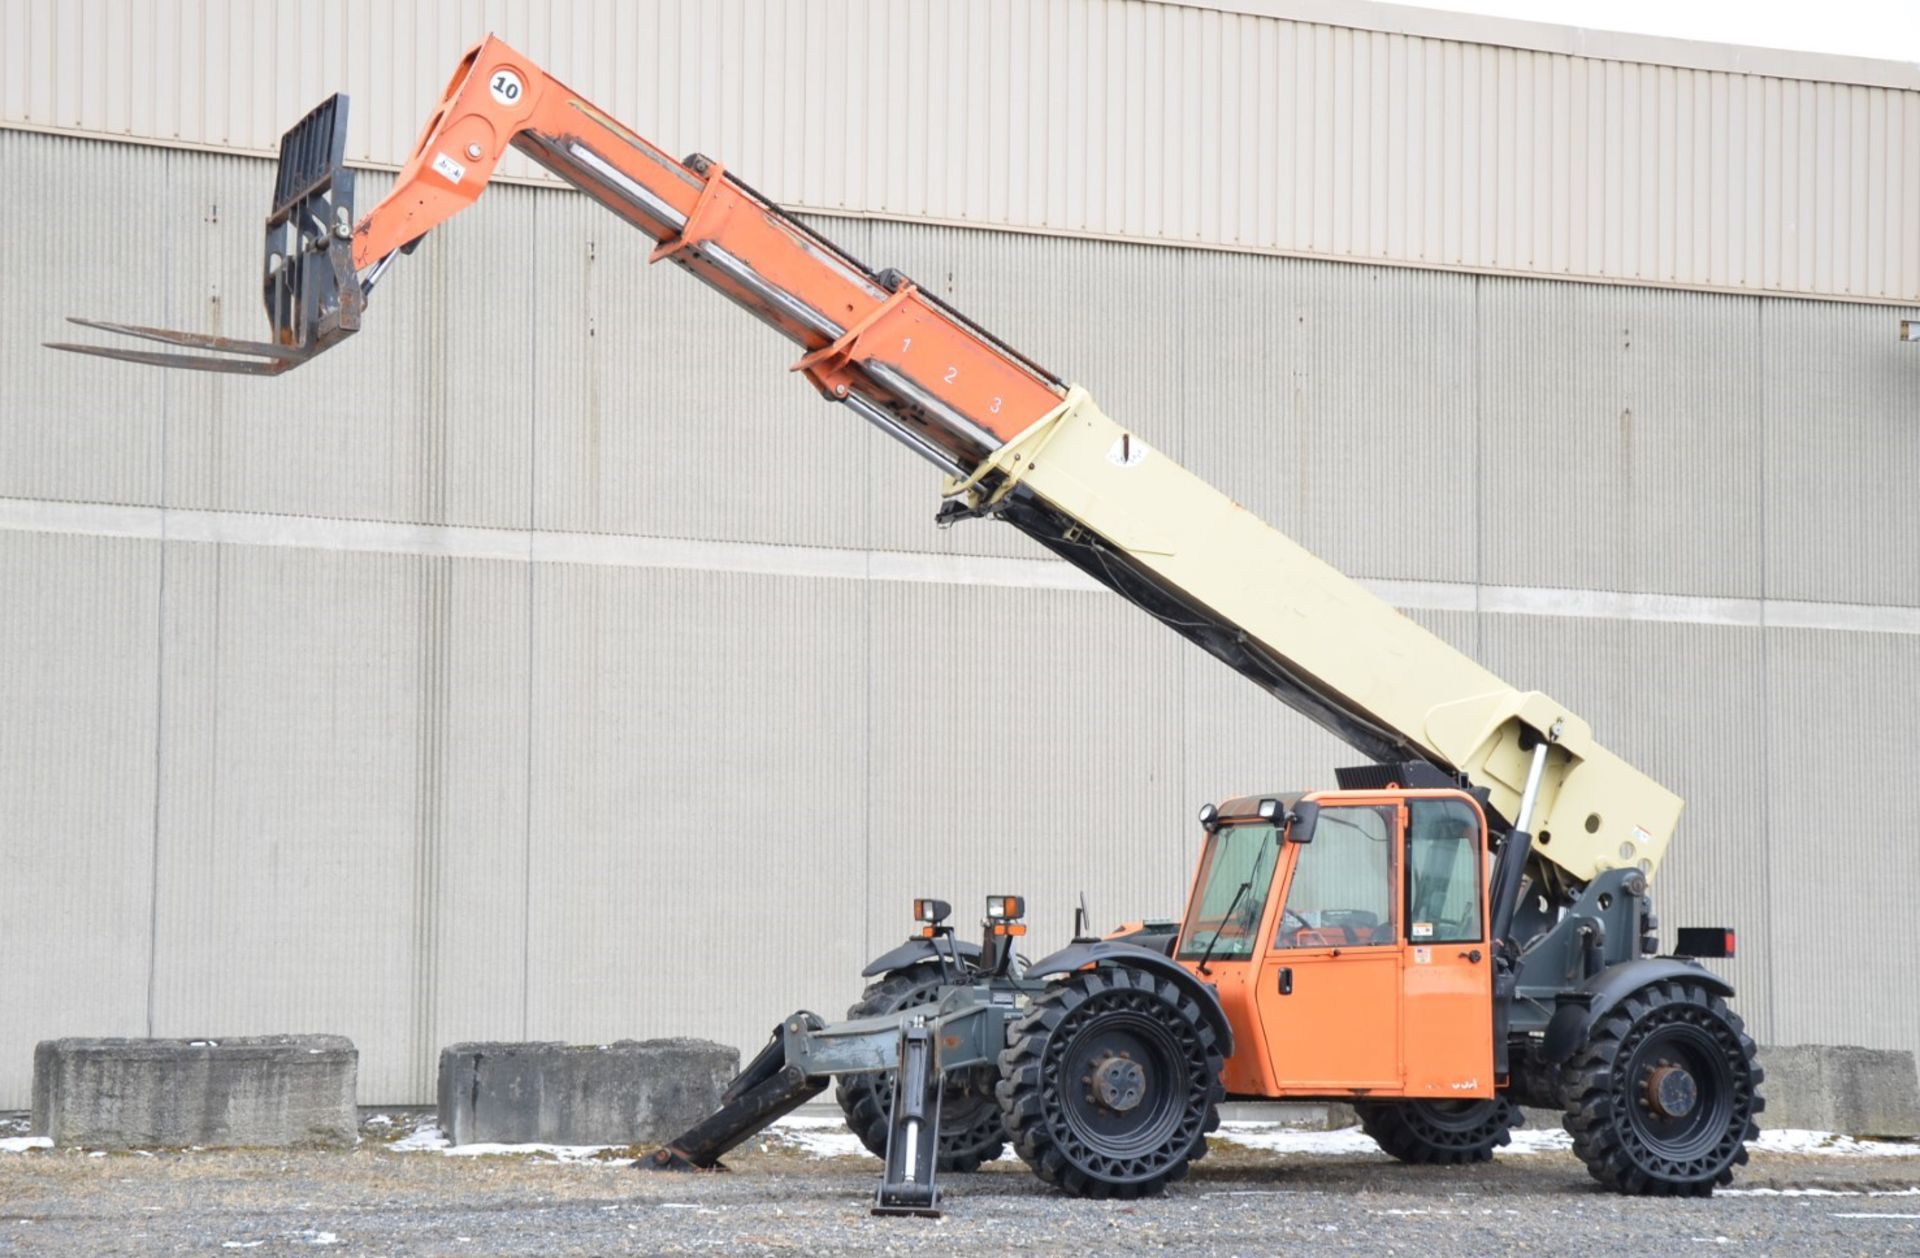 JLG (2011) G10-55A 10,000 LBS. CAPACITY DIESEL TELEHANDLER FORKLIFT WITH 56' MAX VERTICAL LIFT, - Image 13 of 23